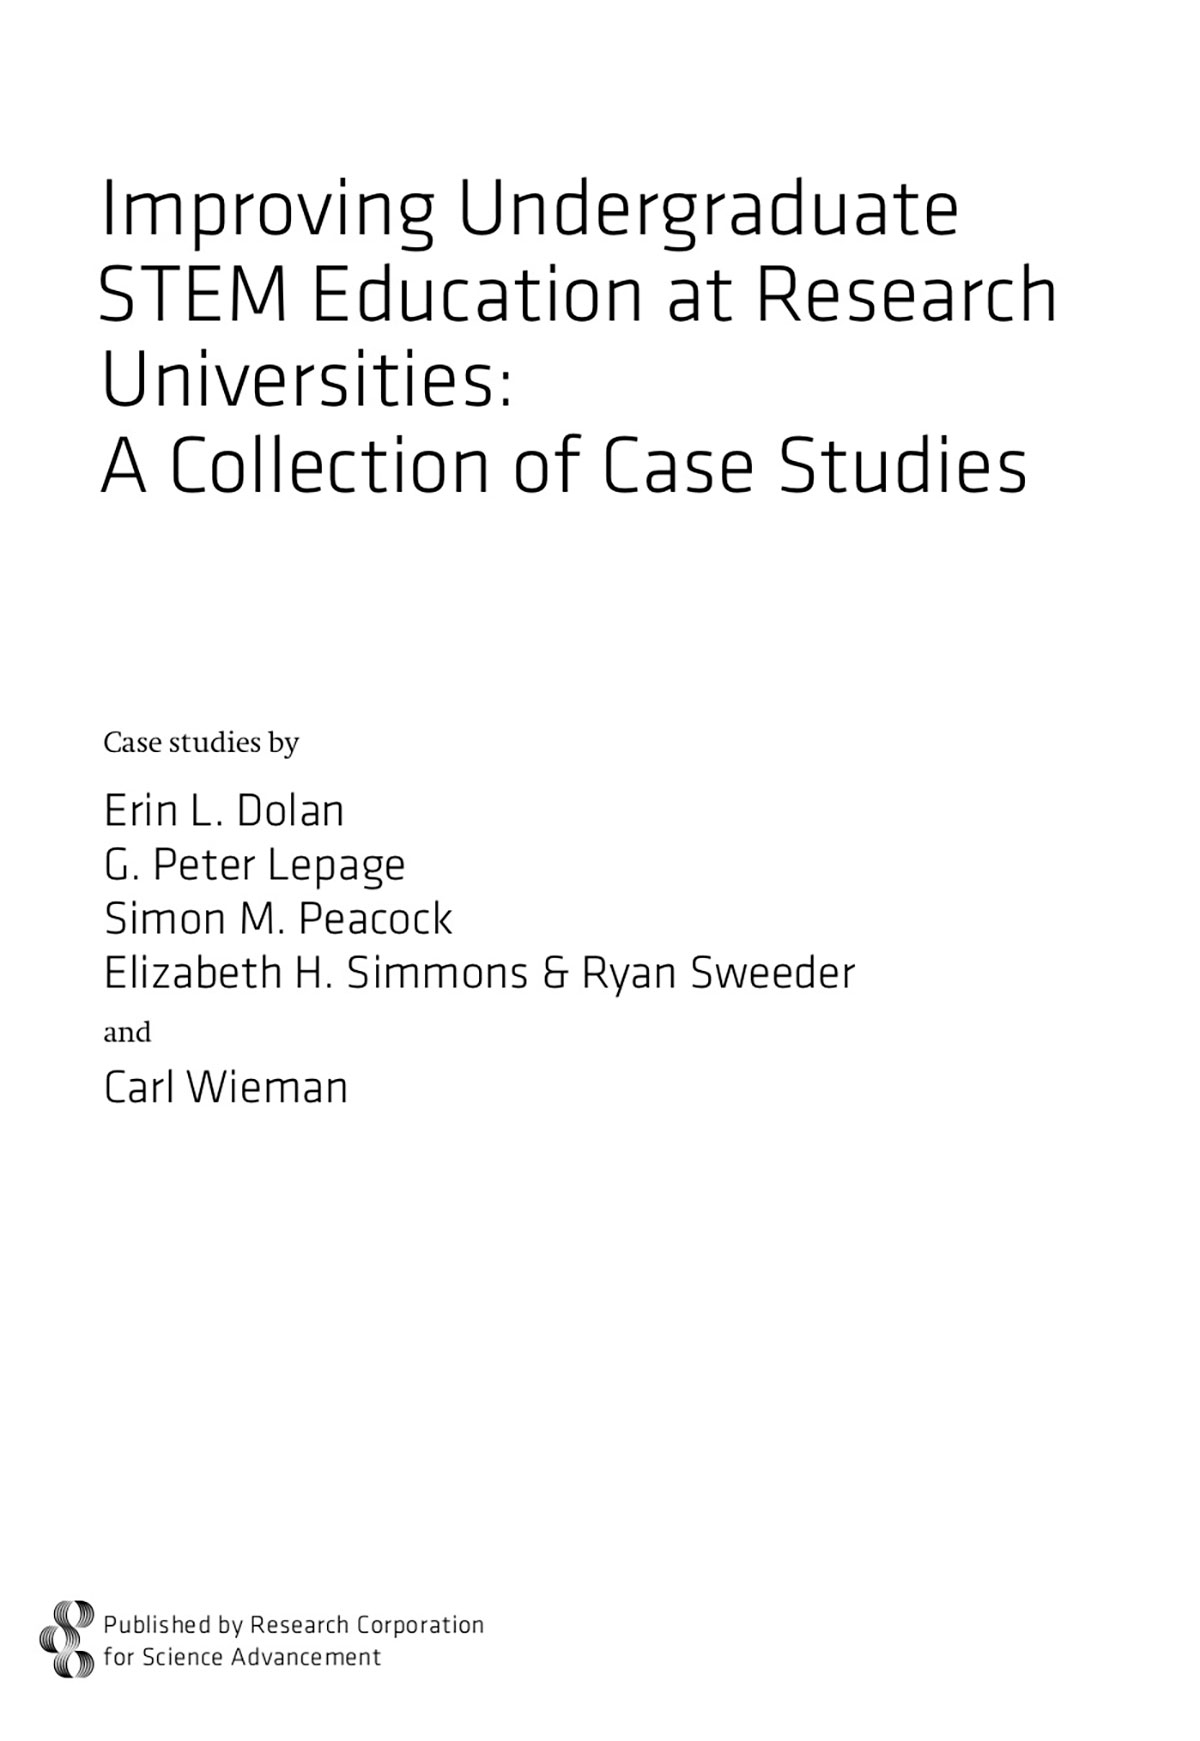 Improving Undergraduate STEM Education at Research Universities: A Collection of Case Studies